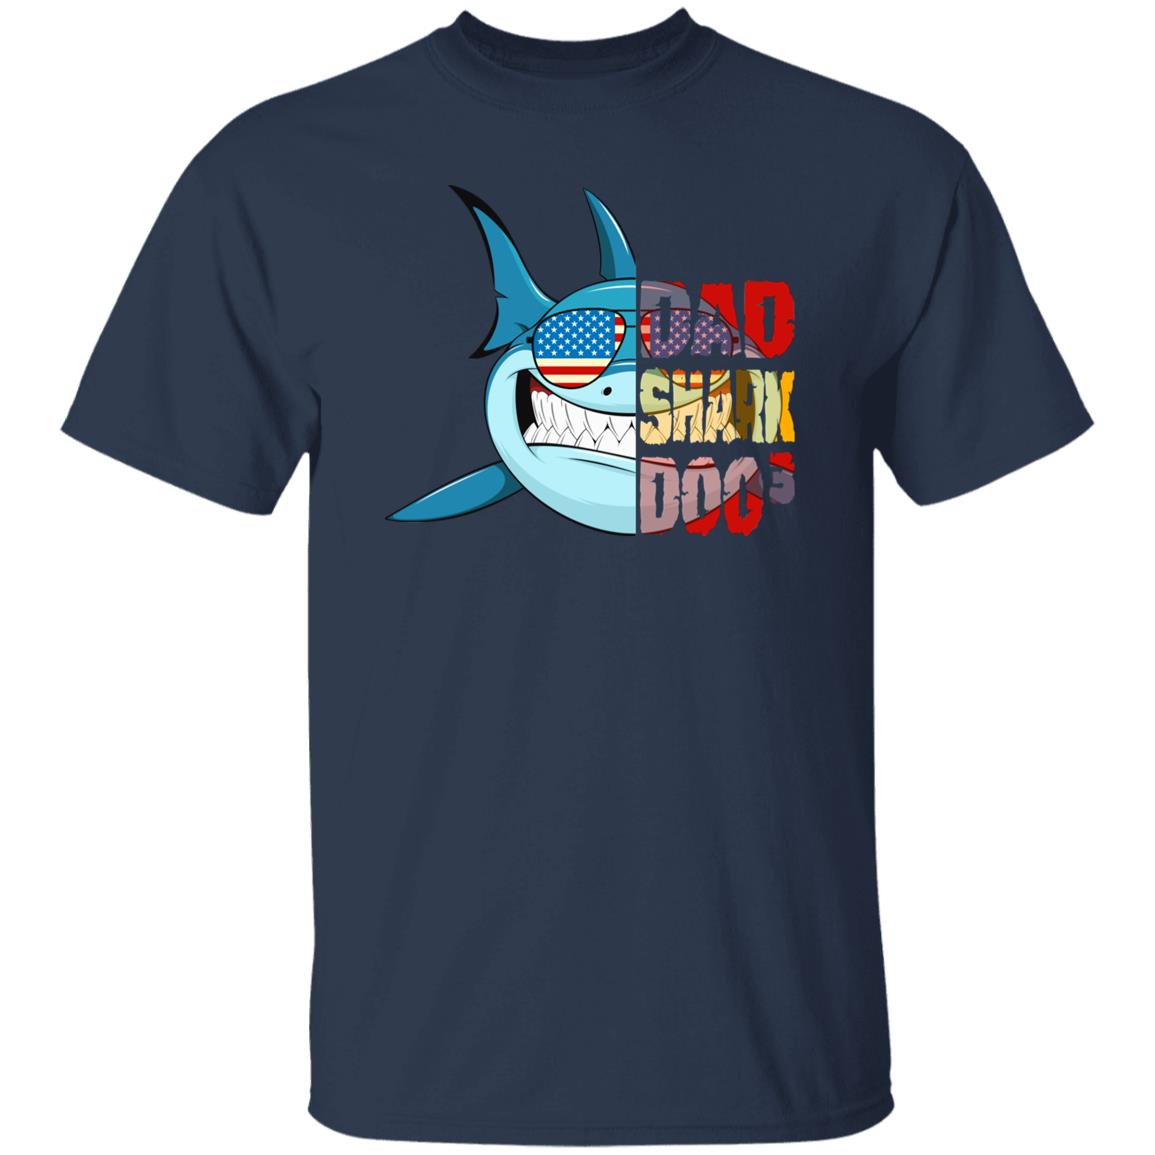 Dad Shark Doo ę shirt gift for father Black Navy Dark Heather-Navy-Family-Gift-Planet